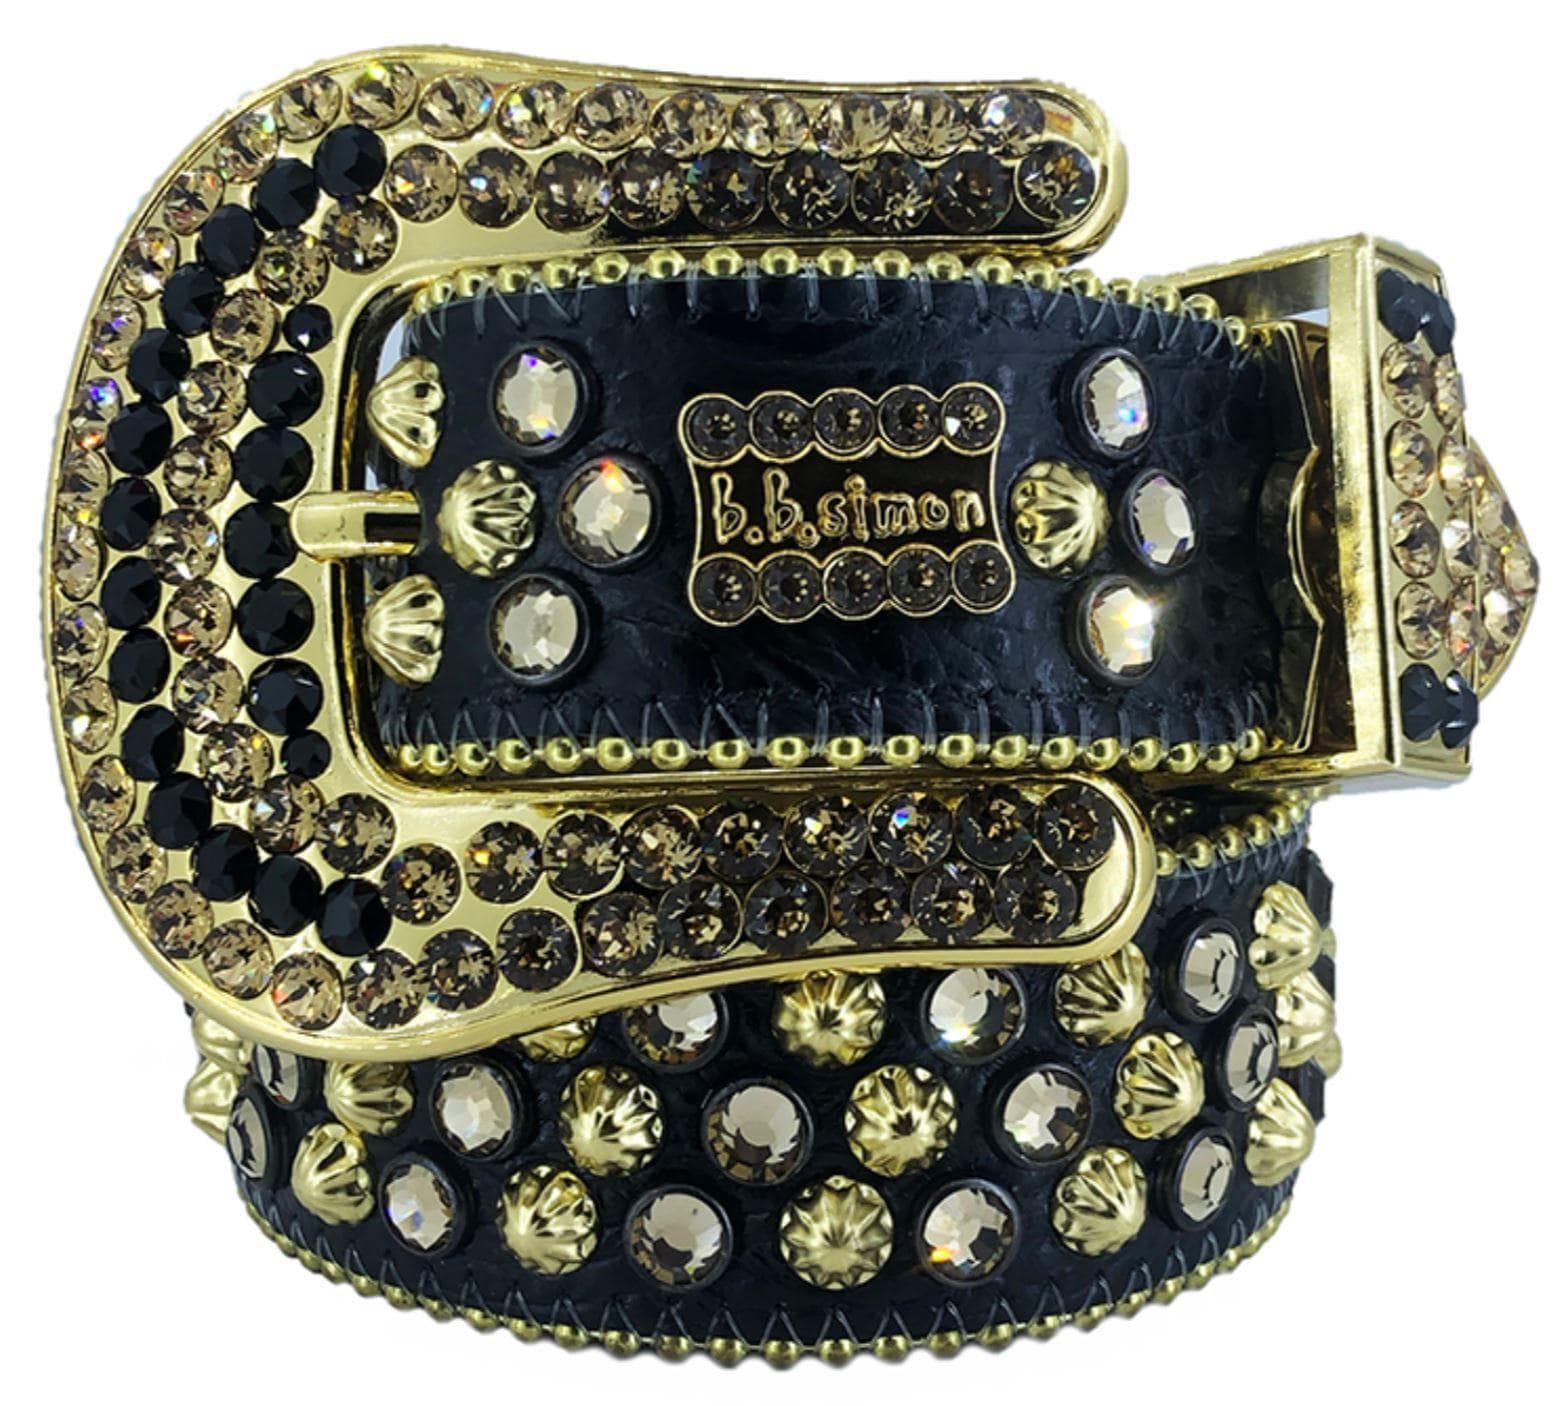 2617 J 59 GF - BB Simon Black Leather with Crystals Belt - Amore Accessories